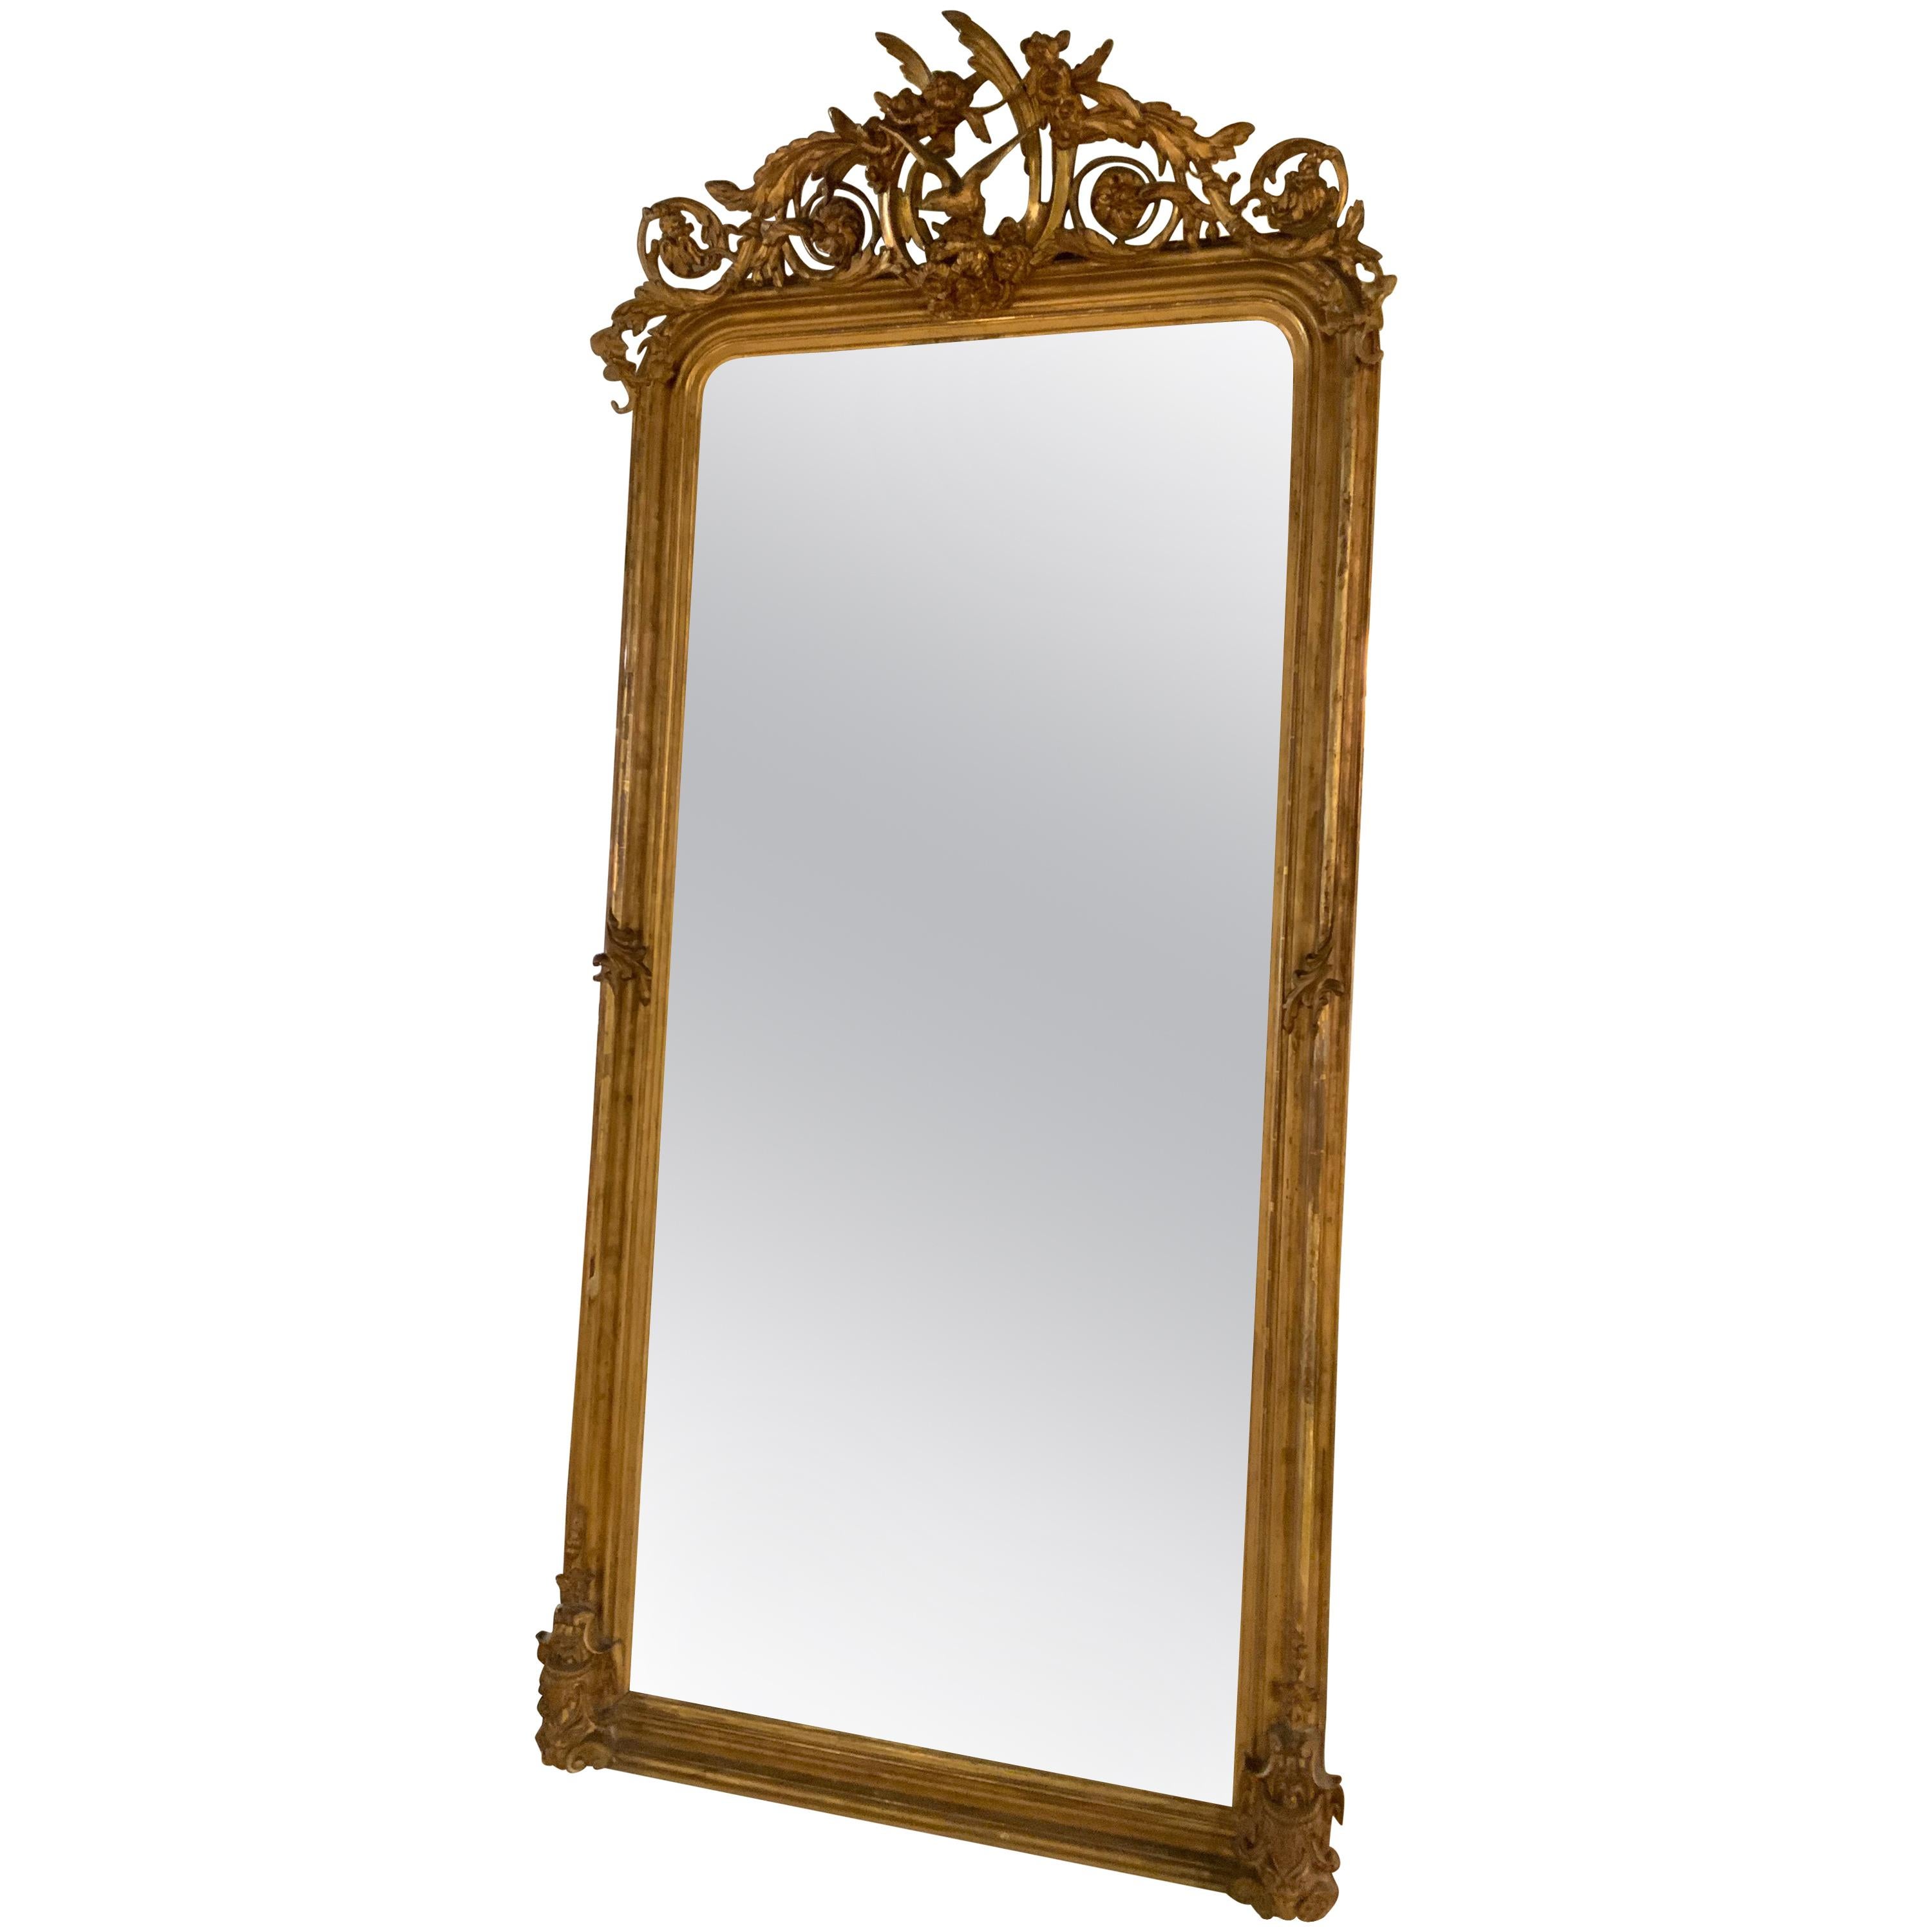 Antique French Giltwood Mirror with Carved Bird at the Crest, circa 1890